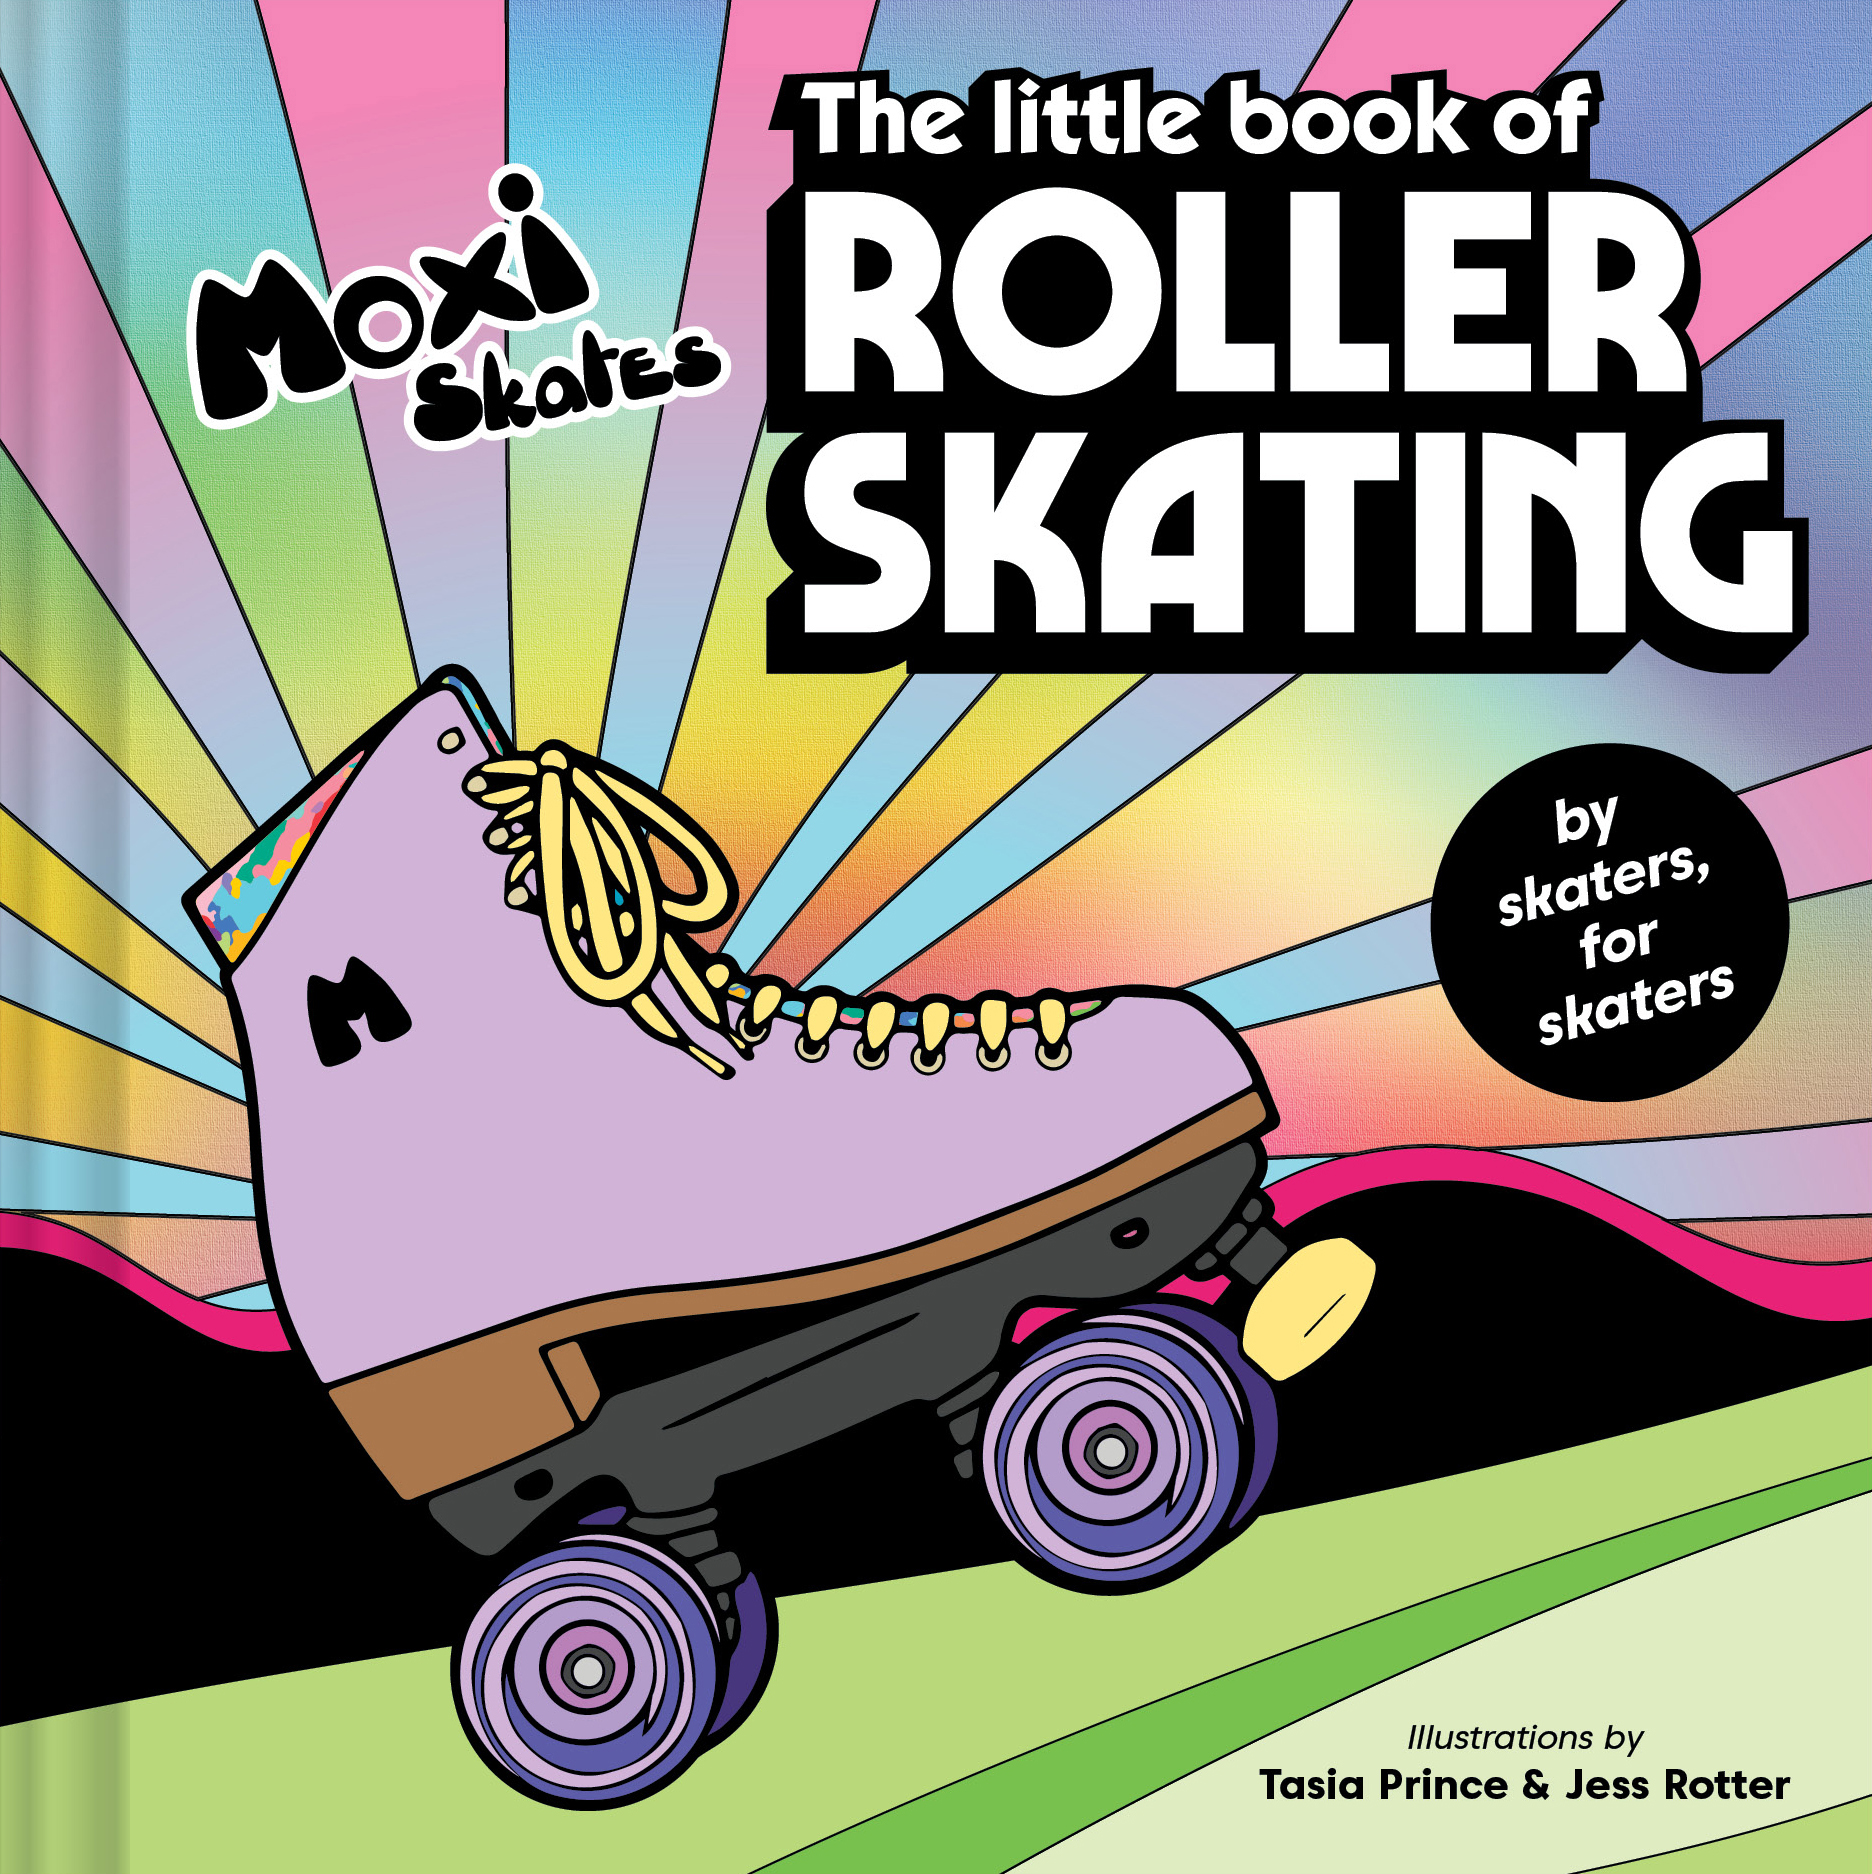 The The Little Book of Roller Skating